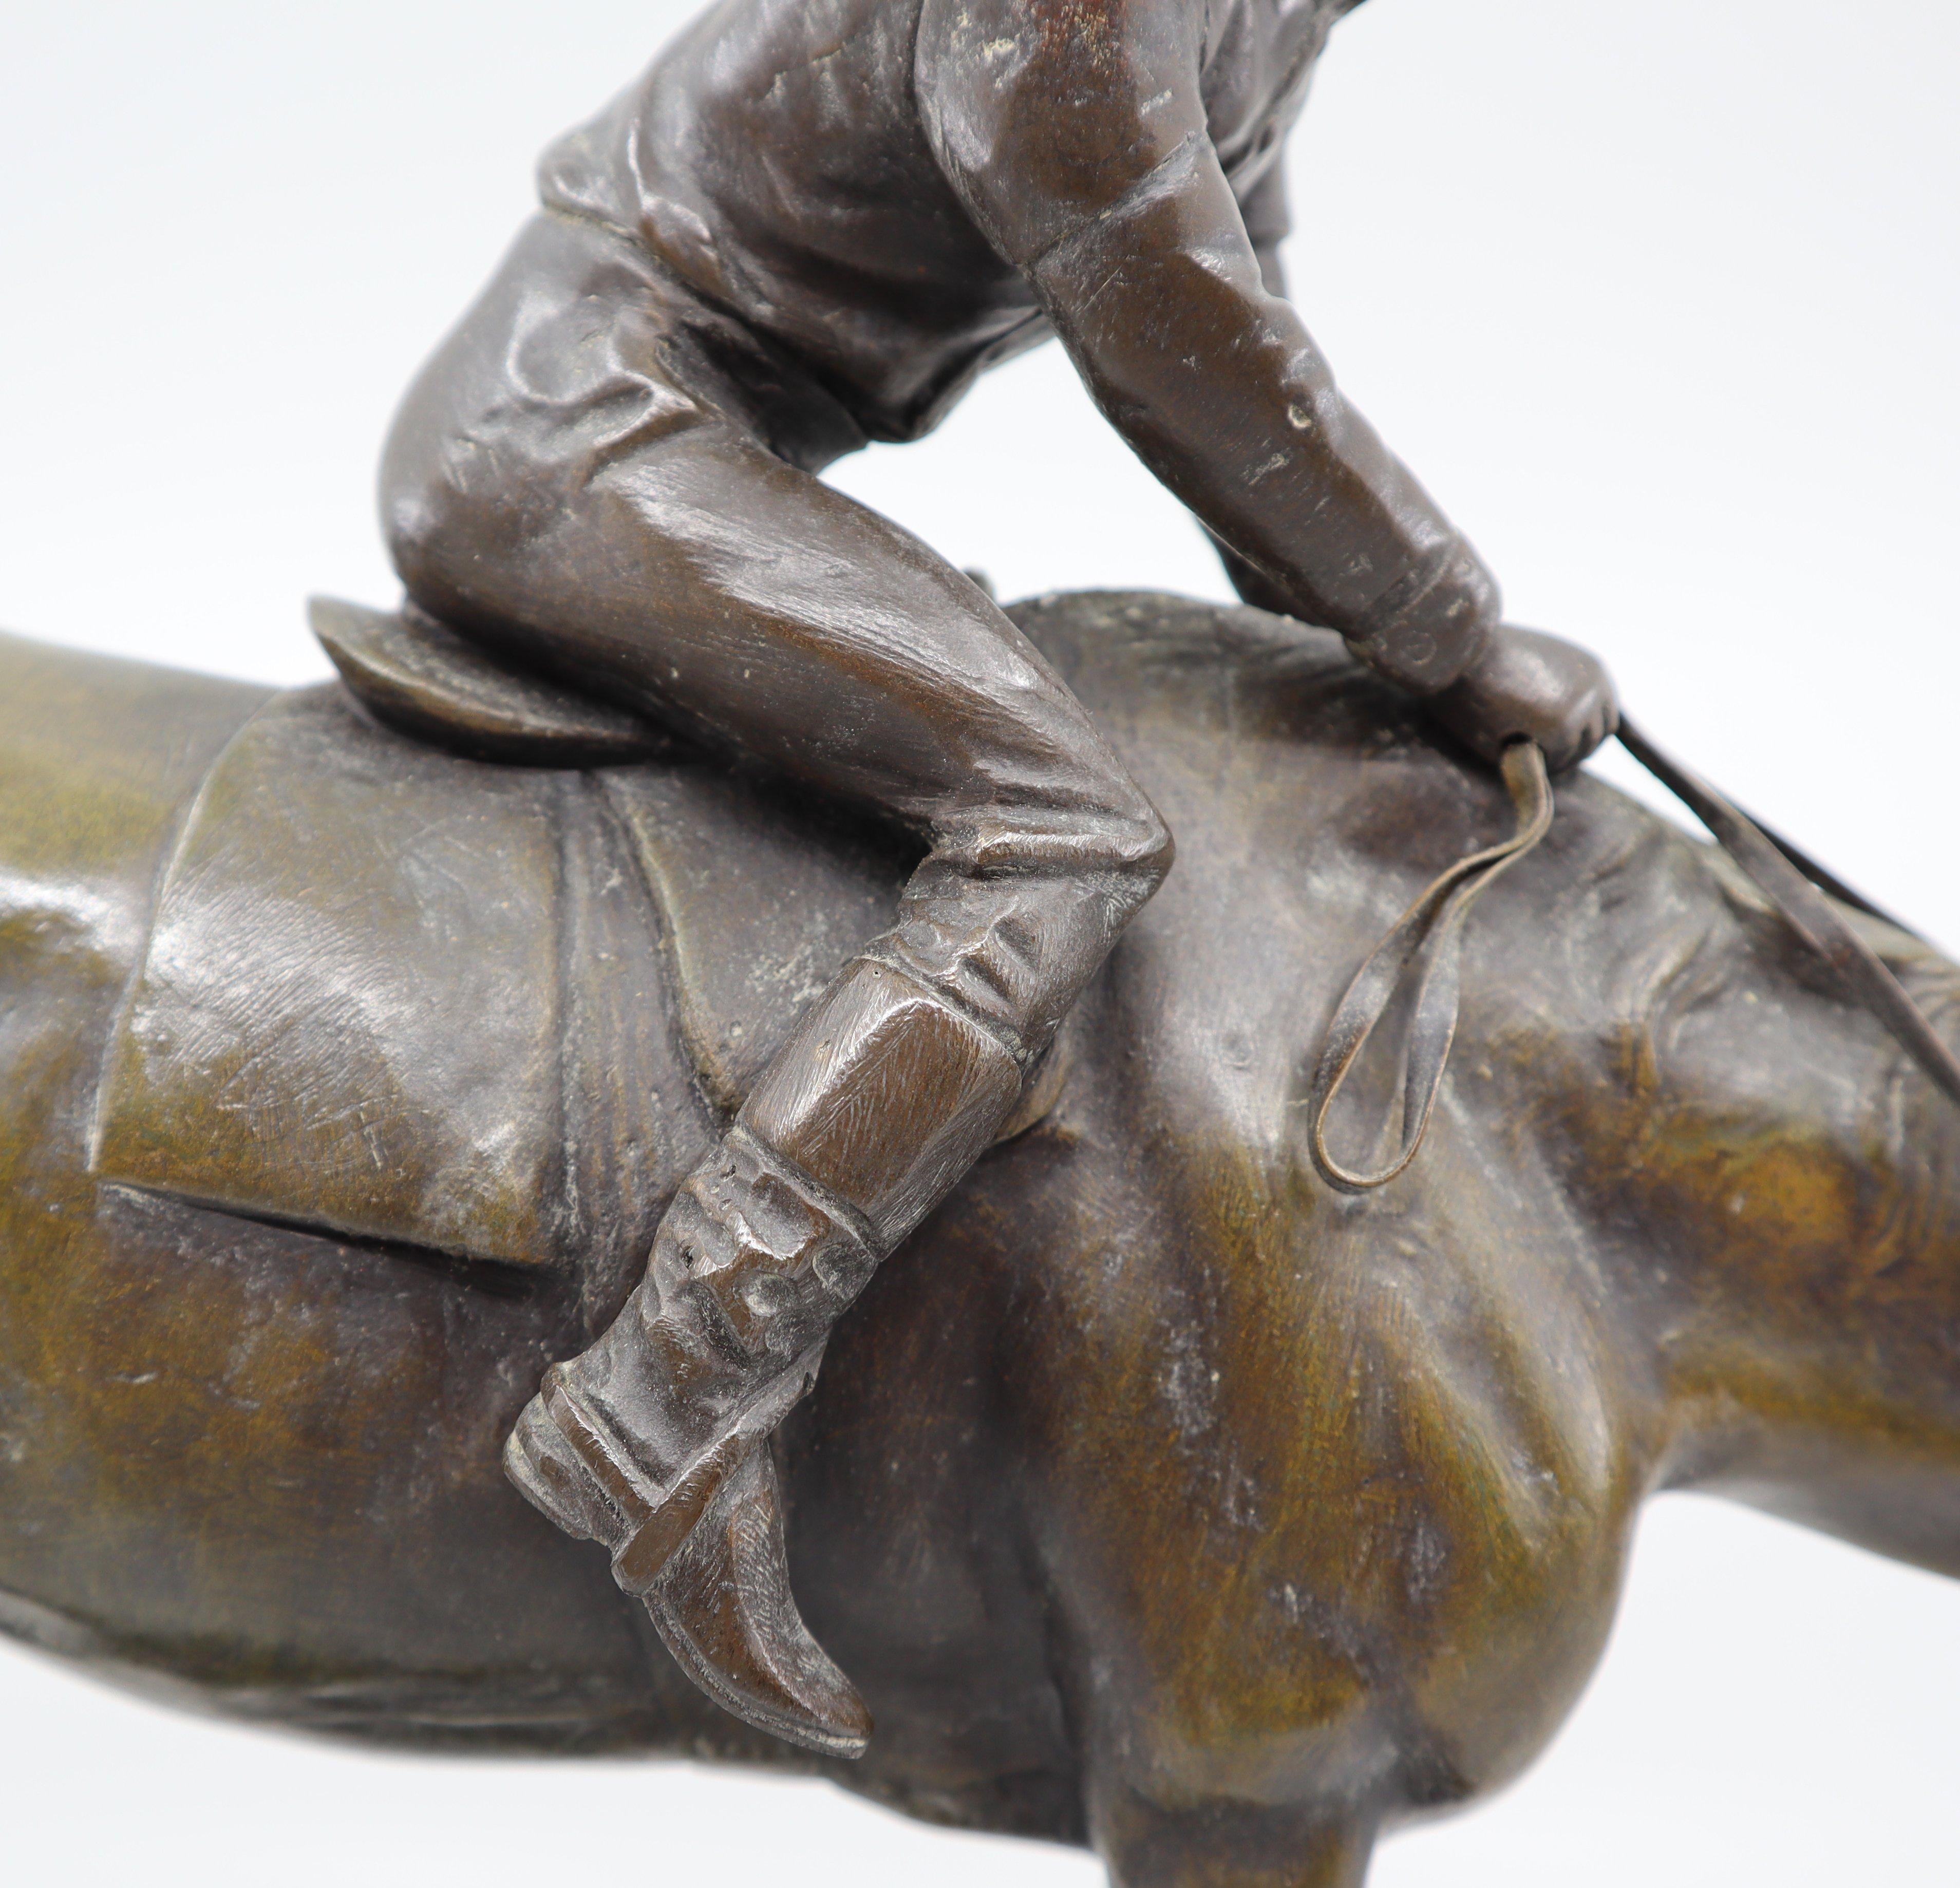 A bronze equestrian statue of a Jockey on his horse by Italian sculptor , G. Ferrari 19th Century  
Giuseppe Ferrari was an Italian sculptor born in 1843. His work portrayed figures and groups in a very realistic manner.

The statue is in excellent